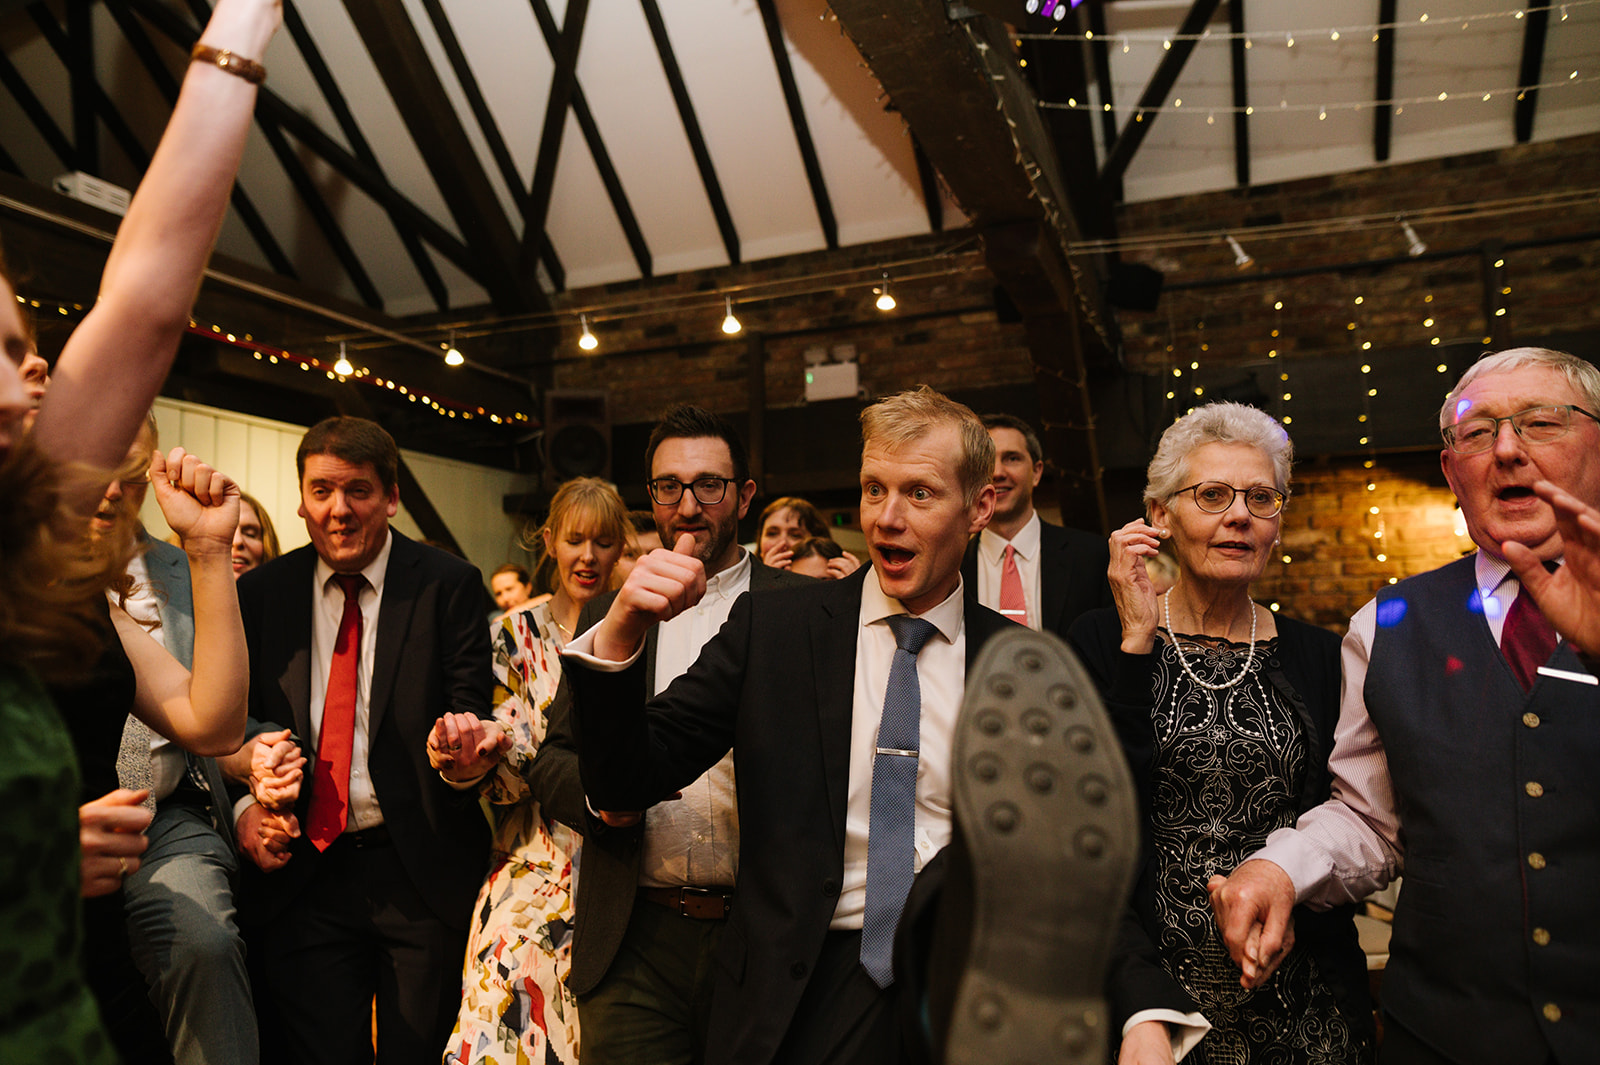 Guests dancing at the Dickens Inn Central London Wedding